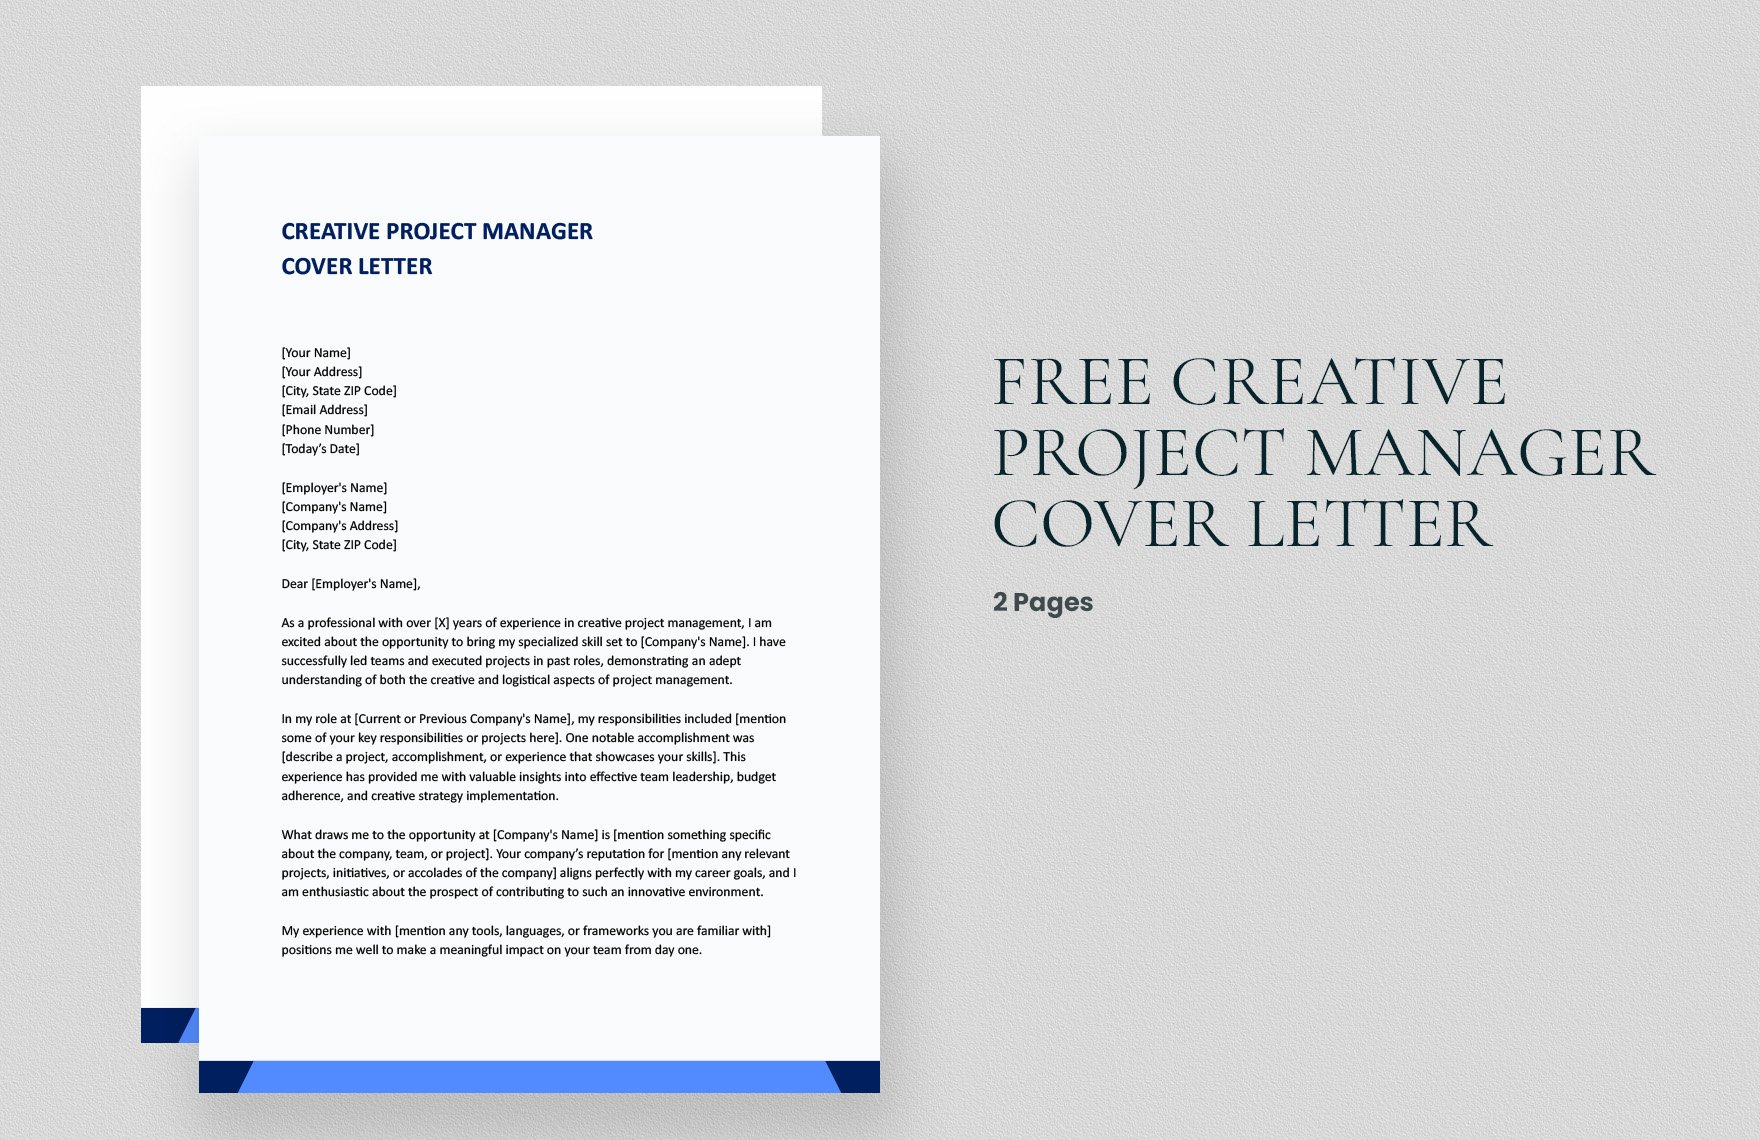 Creative Project Manager Cover Letter